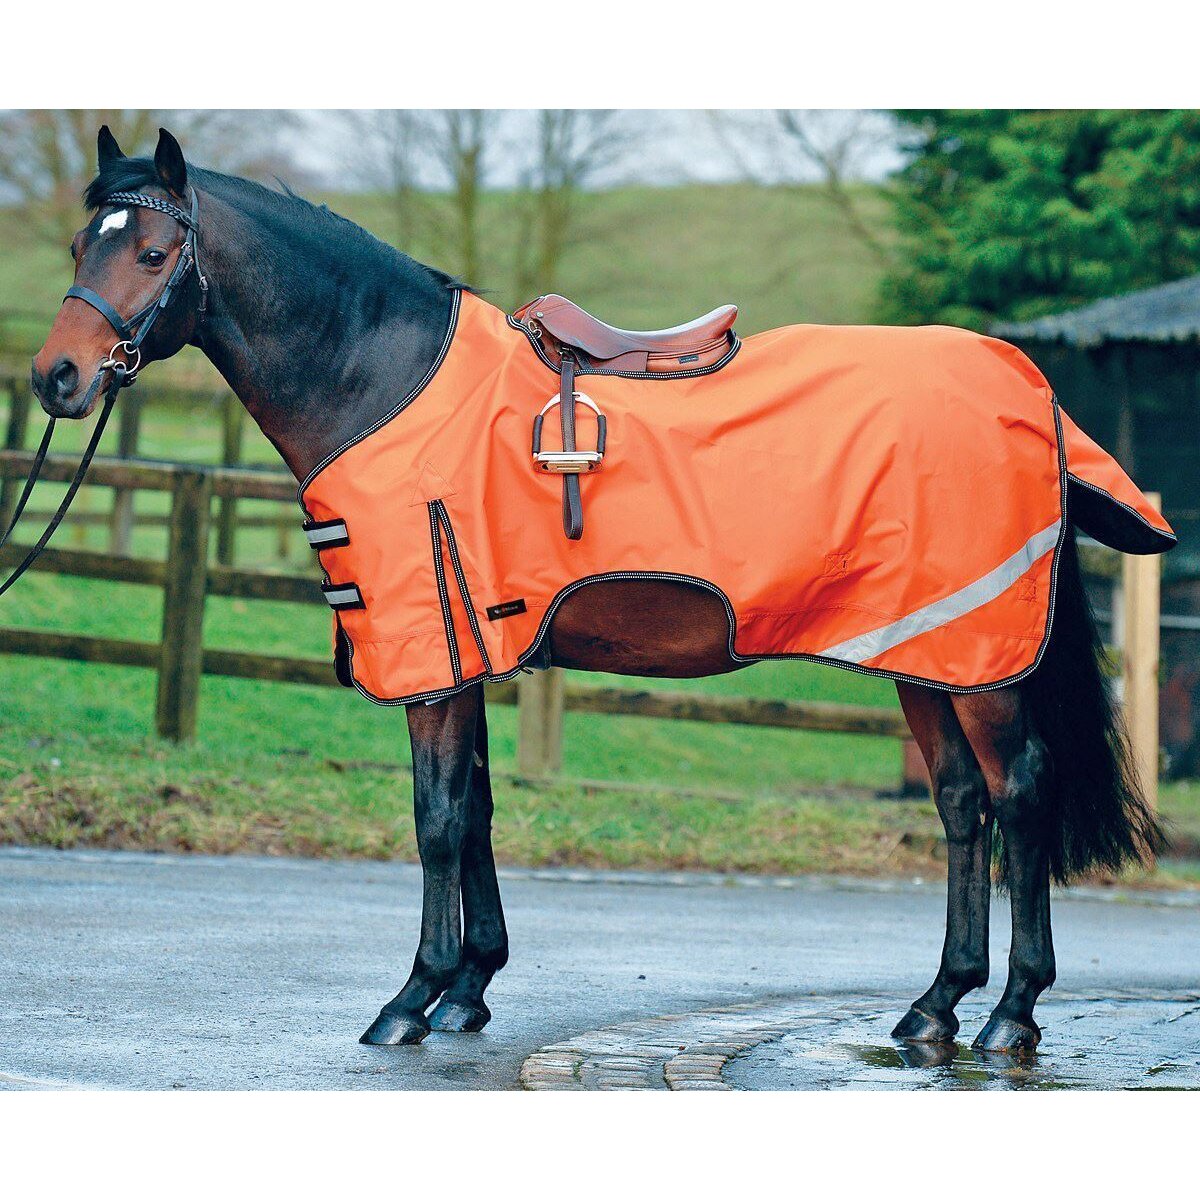 White Horse Equestrian Boston Pony Riding Waterproof Reflective Exercise Sheet